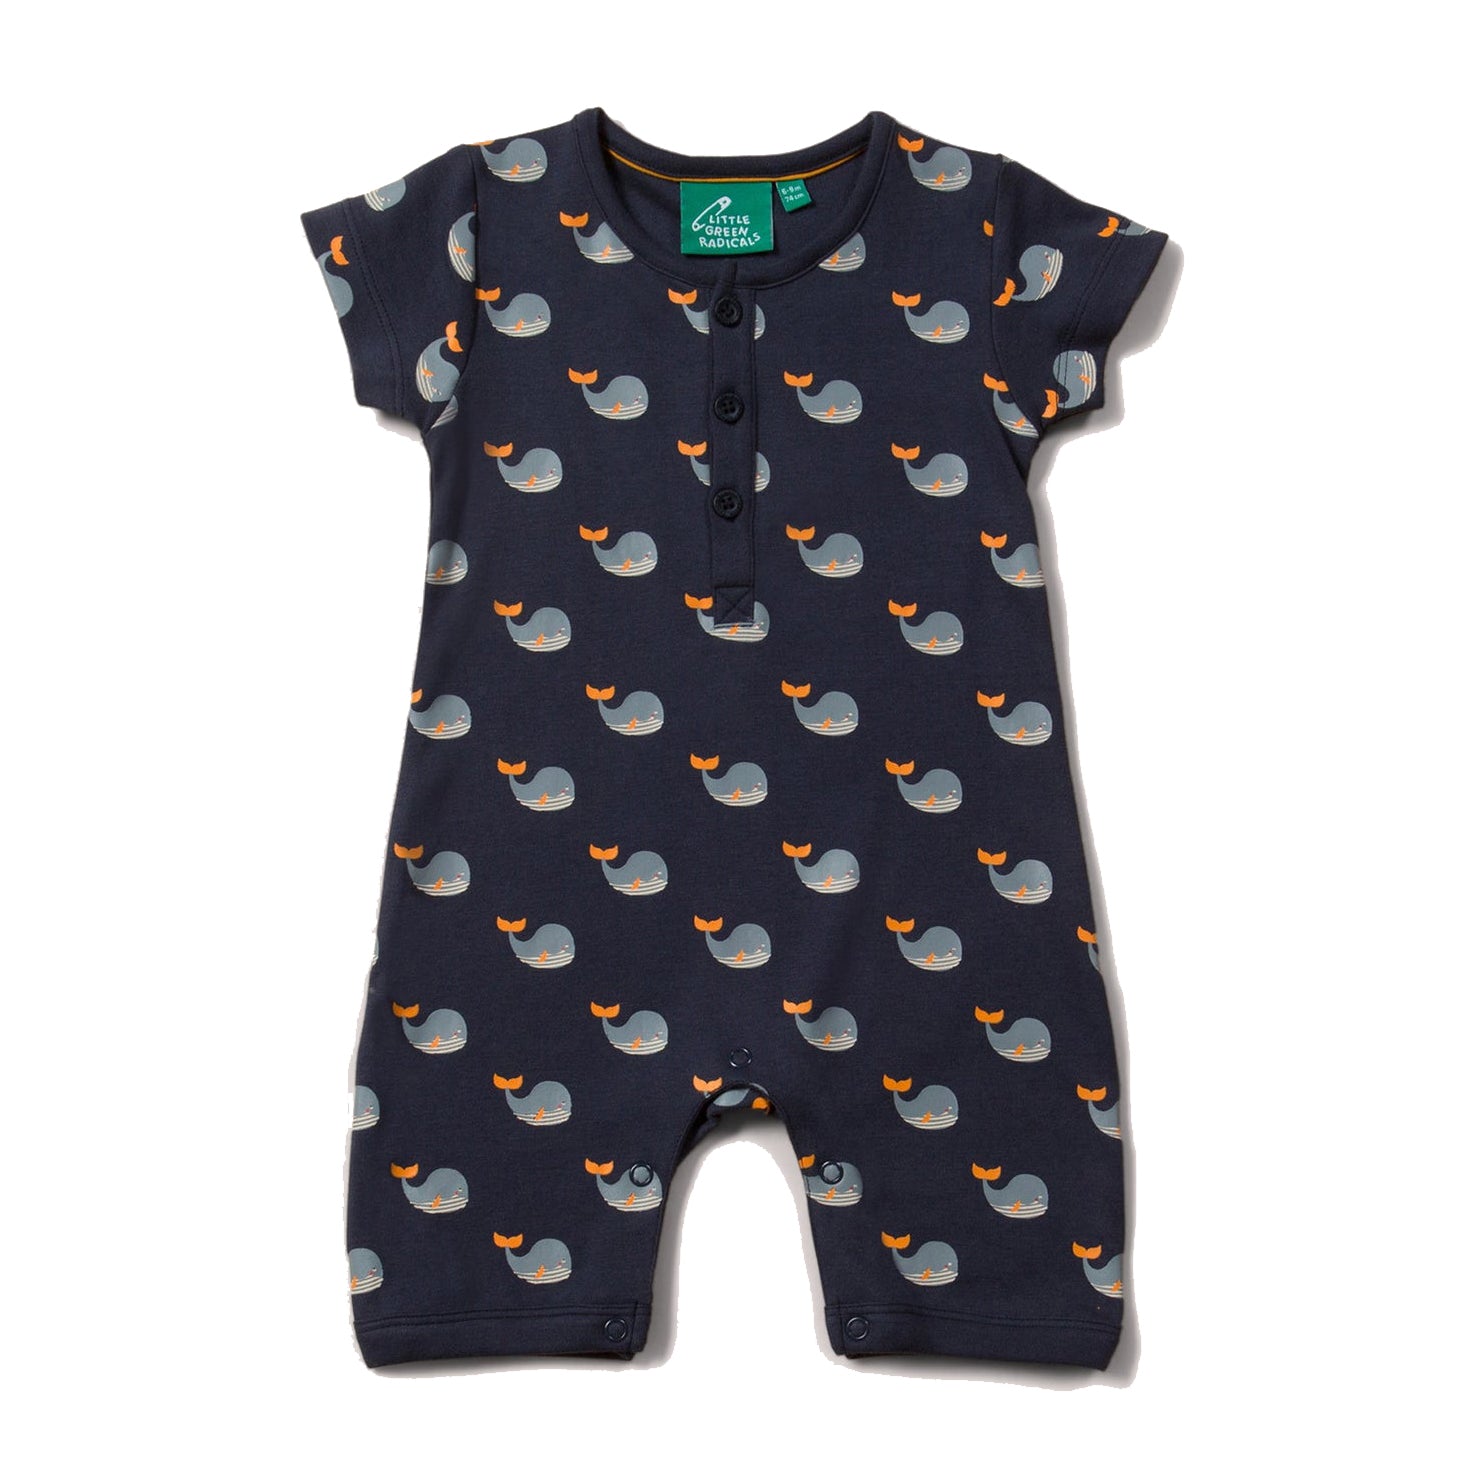 Little Green Radicals Whale song shortie romper